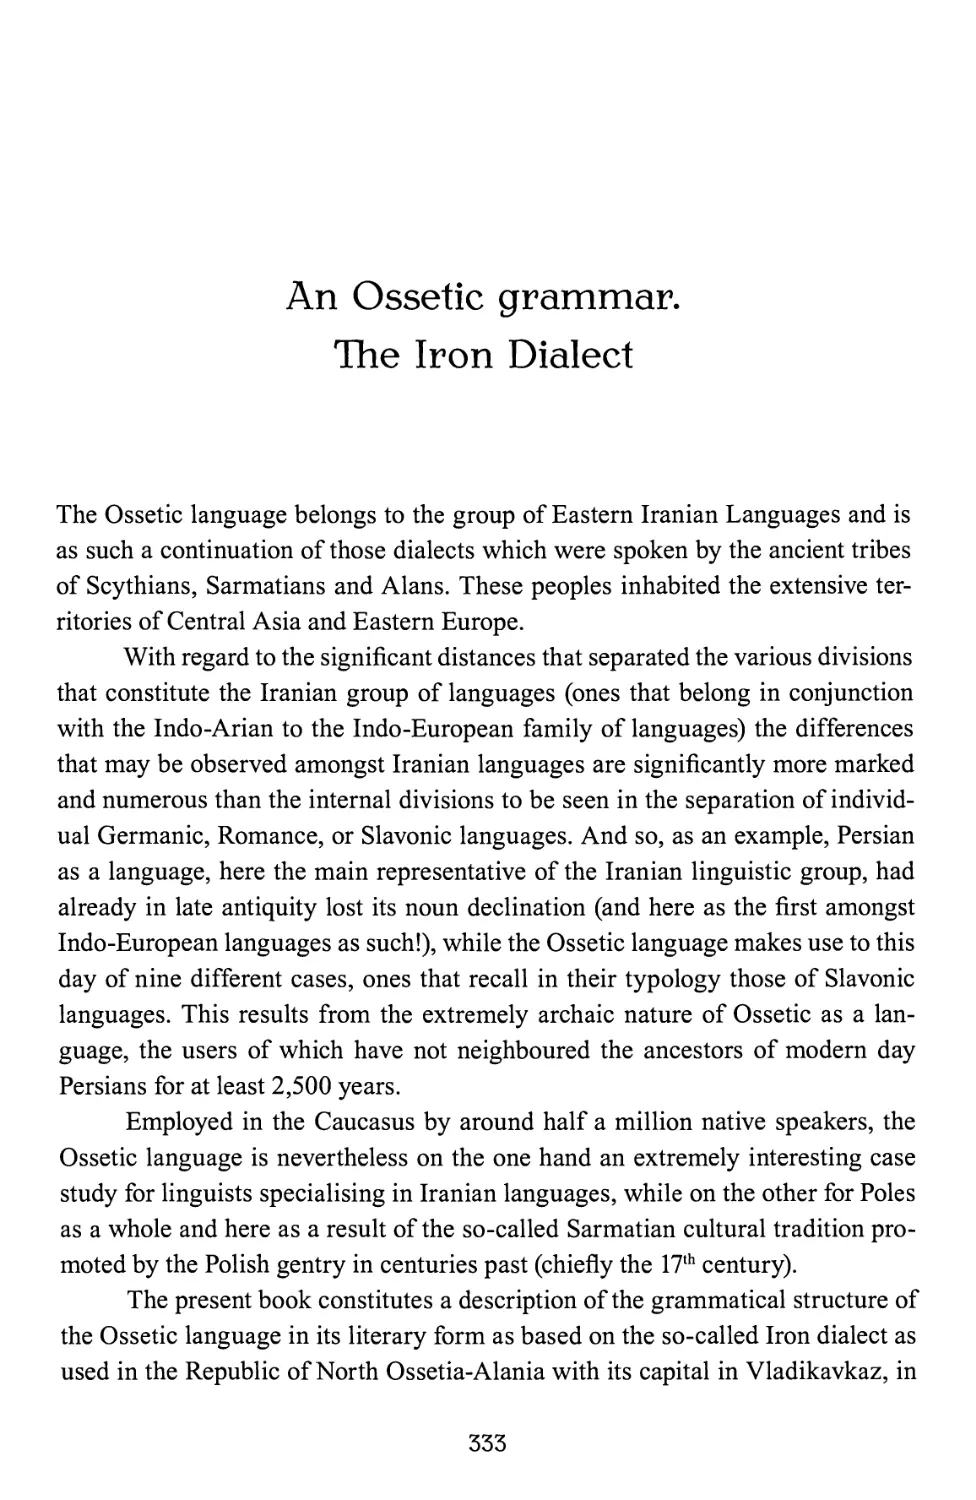 An Ossetic grammar. The Iron Dialect